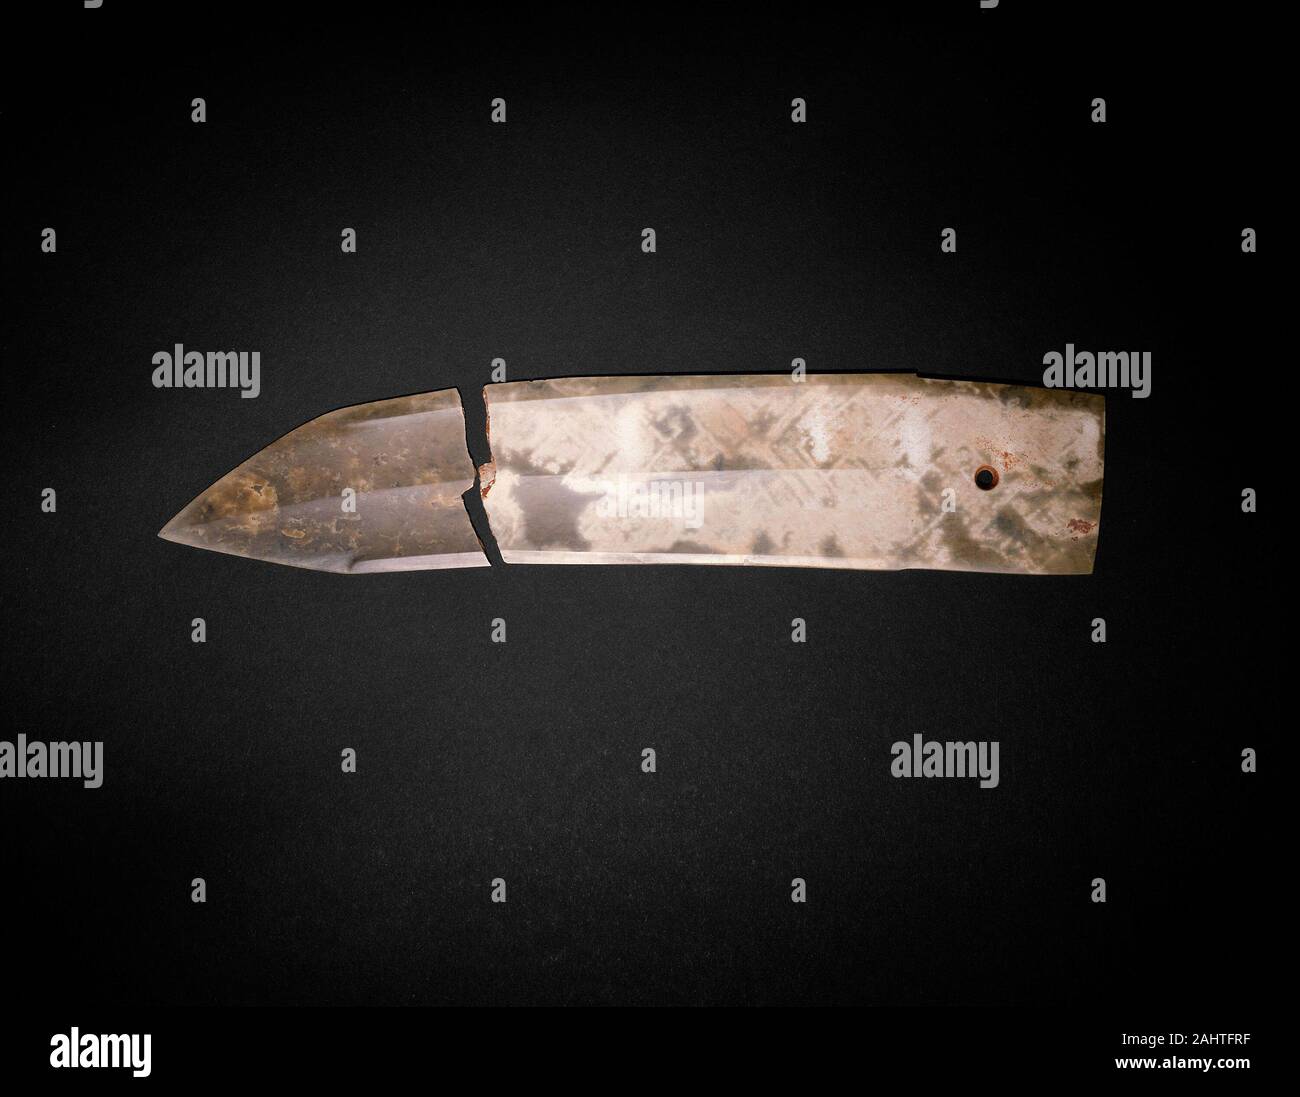 Dagger-Blade (ge). 1300 BC–1000 BC. China. Jade The earliest archaeological finds of silk in China comprise very small fragments of fabric that are datable to the 4th and 3rd millennia B.C. Silks with woven patterns are rarely preserved but can be documented about one thousand years later, primarily through ghost-like imprints on jade implements as well as bronze vessels and weapons. Before burial, these prestigious ceremonial objects were evidently wrapped in fragile but fugitive silk fabrics.Preserved near the edge of this jade blade is a three-dimensional pseudomorph (“false form”) of a squ Stock Photo